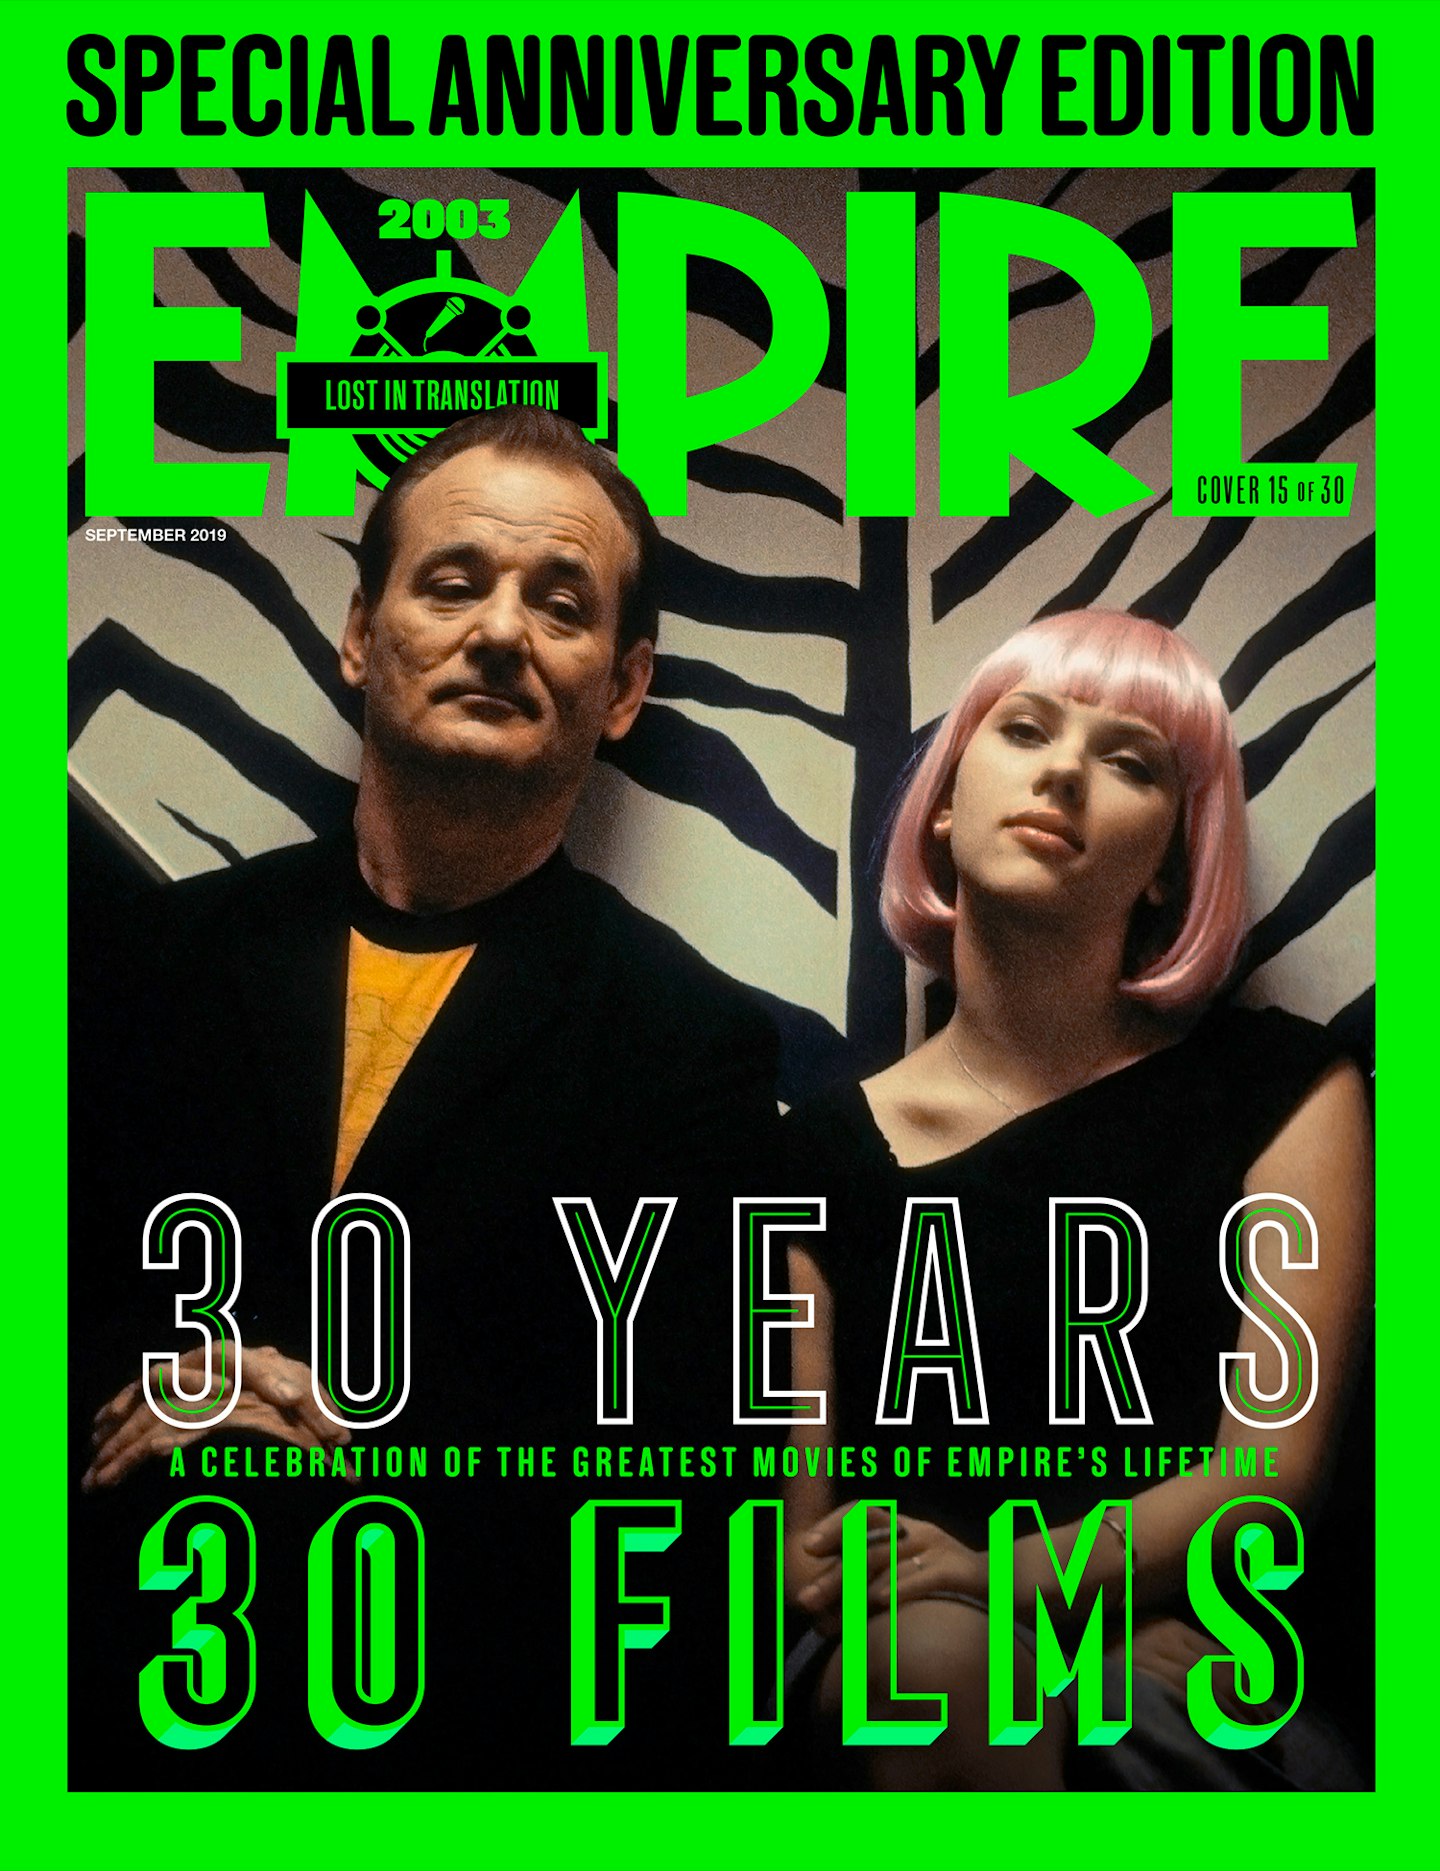 Empire's 30th Anniversary Edition Covers – Lost In Translation